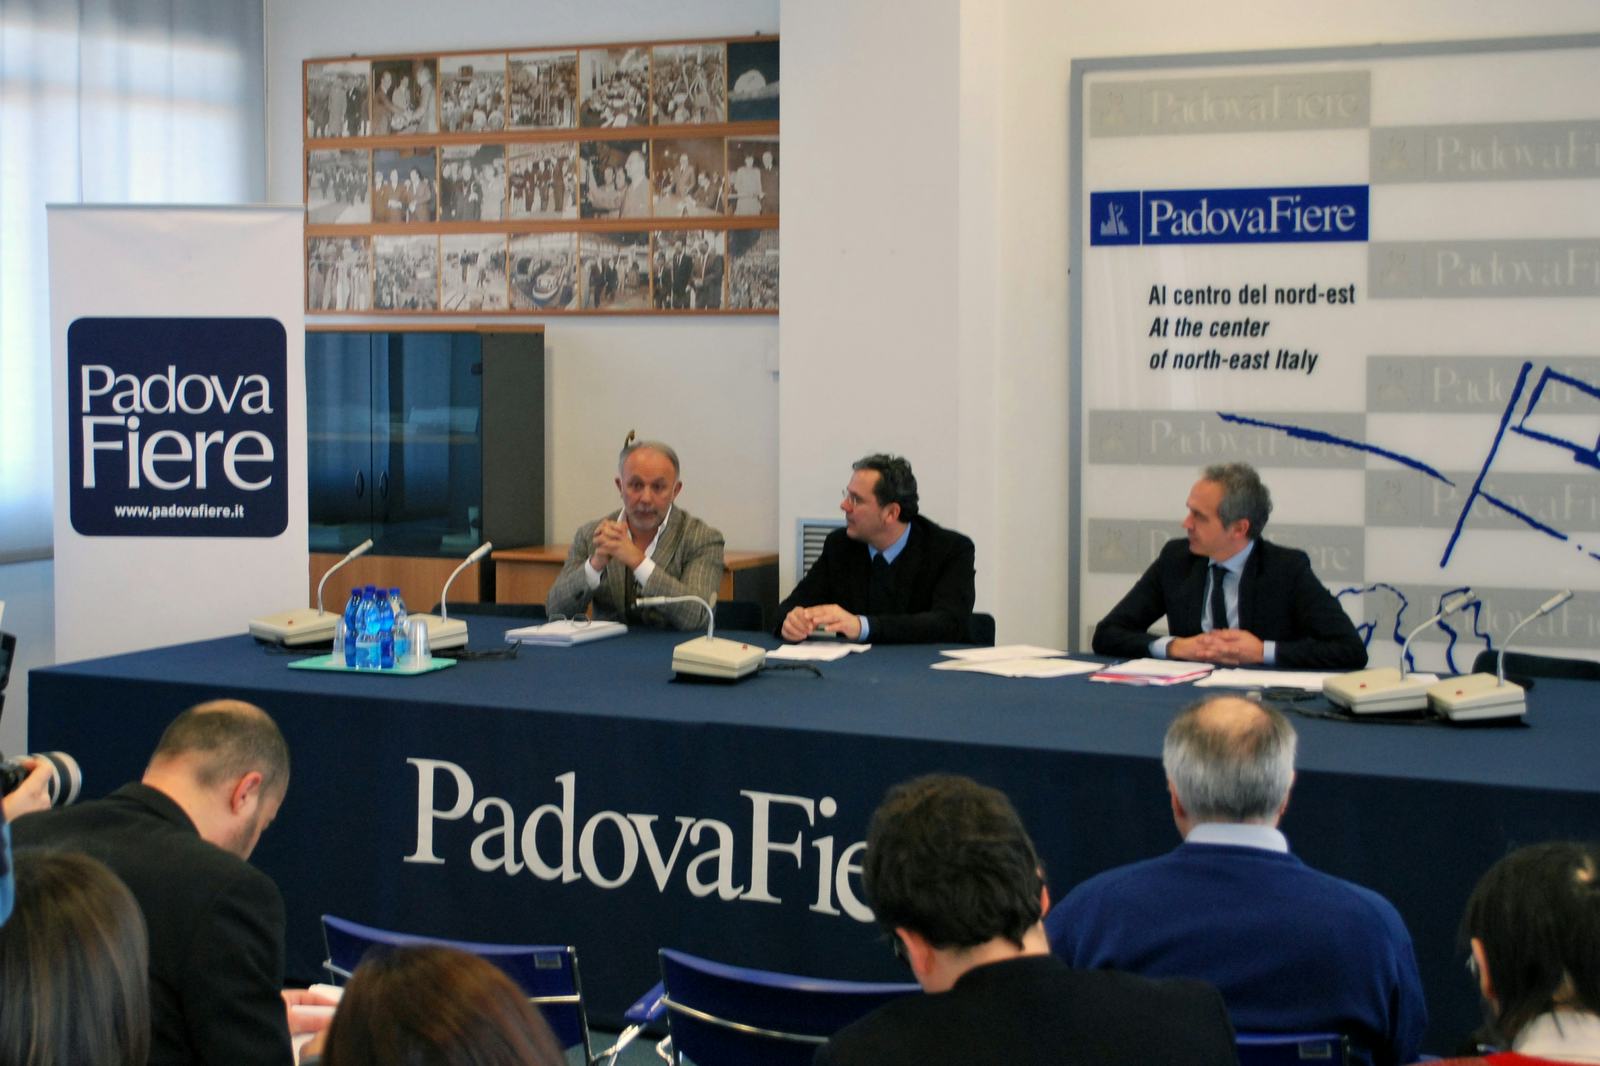 “Former PadovaFiere CEO Paolo Coin masterminded the launch of a competing event in Verona,” said Daniele Villa, current CEO of PadovaFiere. – Photo Claudia Vianino